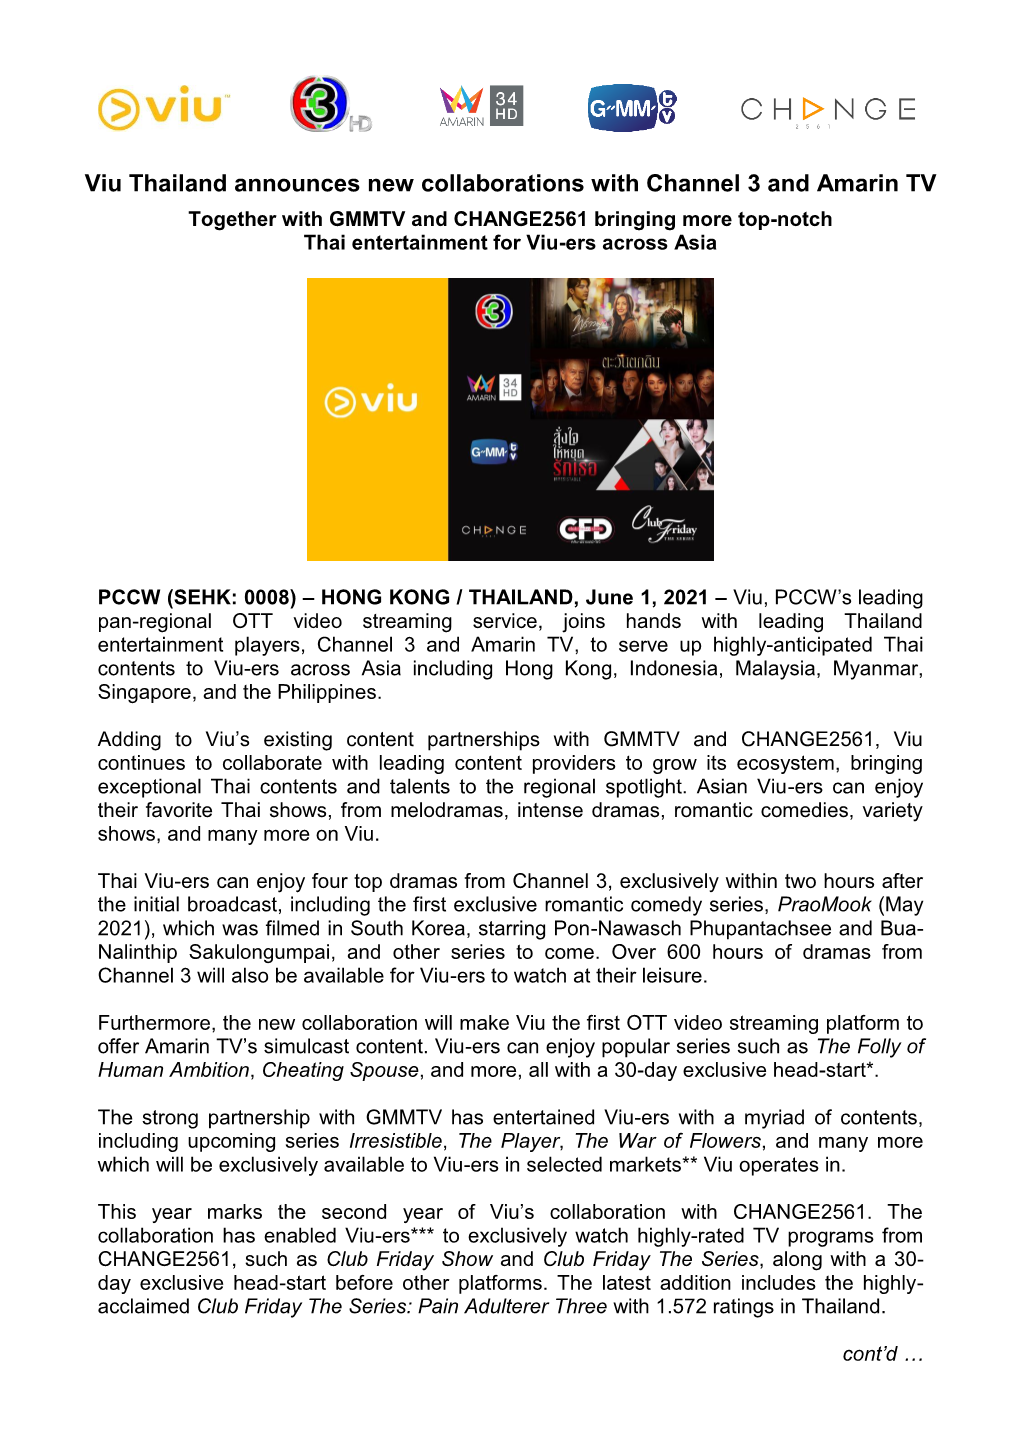 Viu Thailand Announces New Collaborations with Channel 3 And